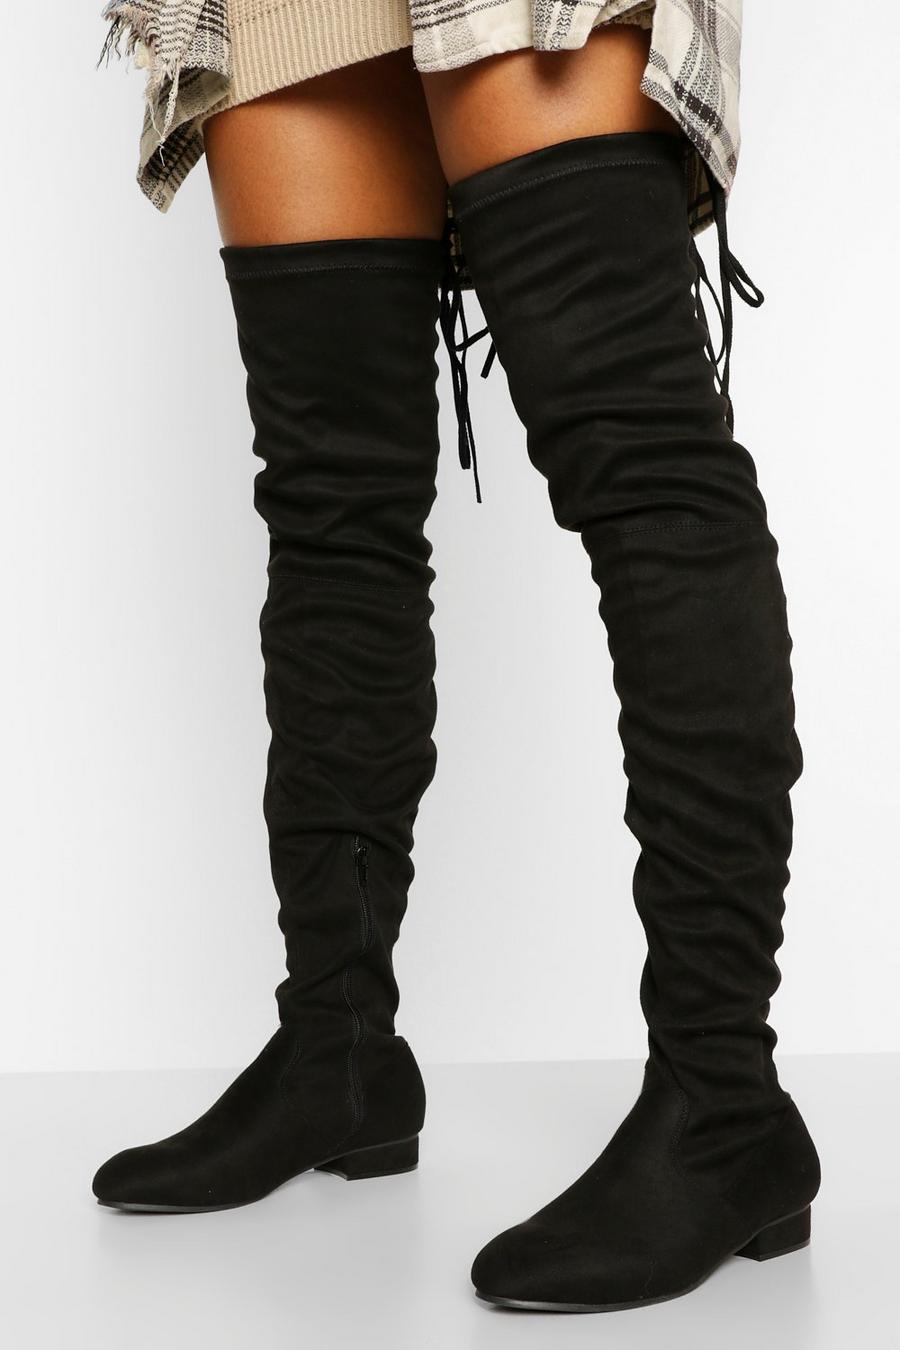 Black Wider Calf Over The Knee Boots image number 1